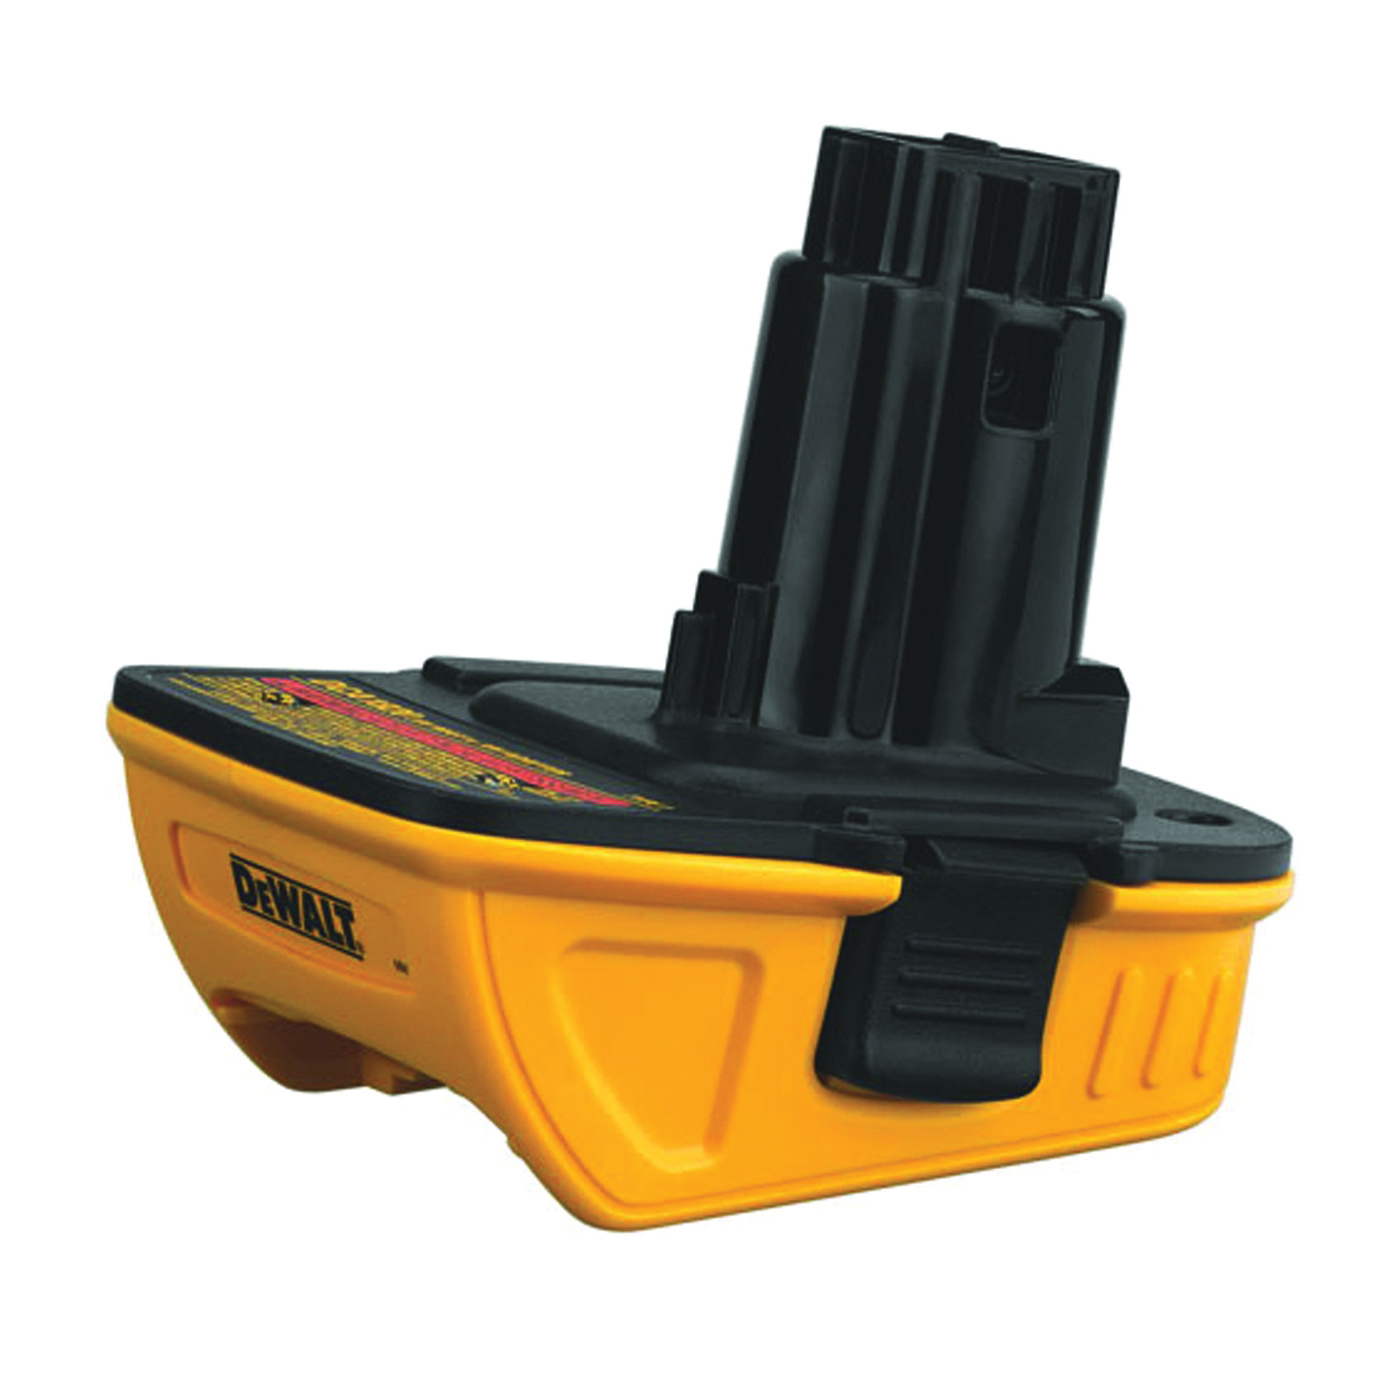 DeWALT DCA1820 Battery Adapter, 18 to 20 V Input, Battery Included: Yes, Includes: (1) 18 V to 20 V MAX Adapter - 2